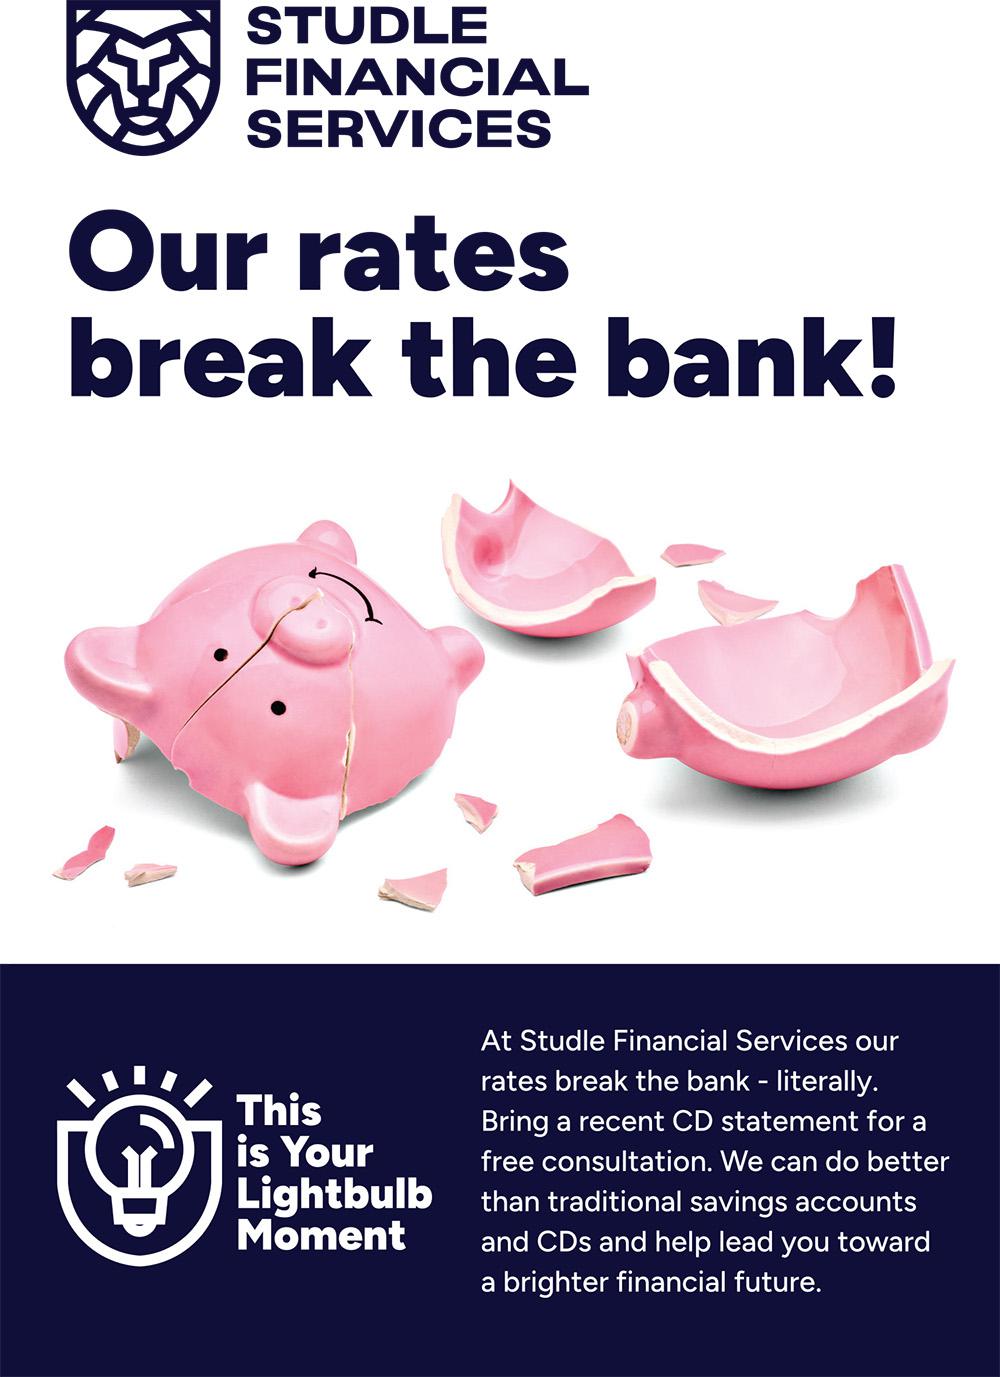 Our rates break the bank!